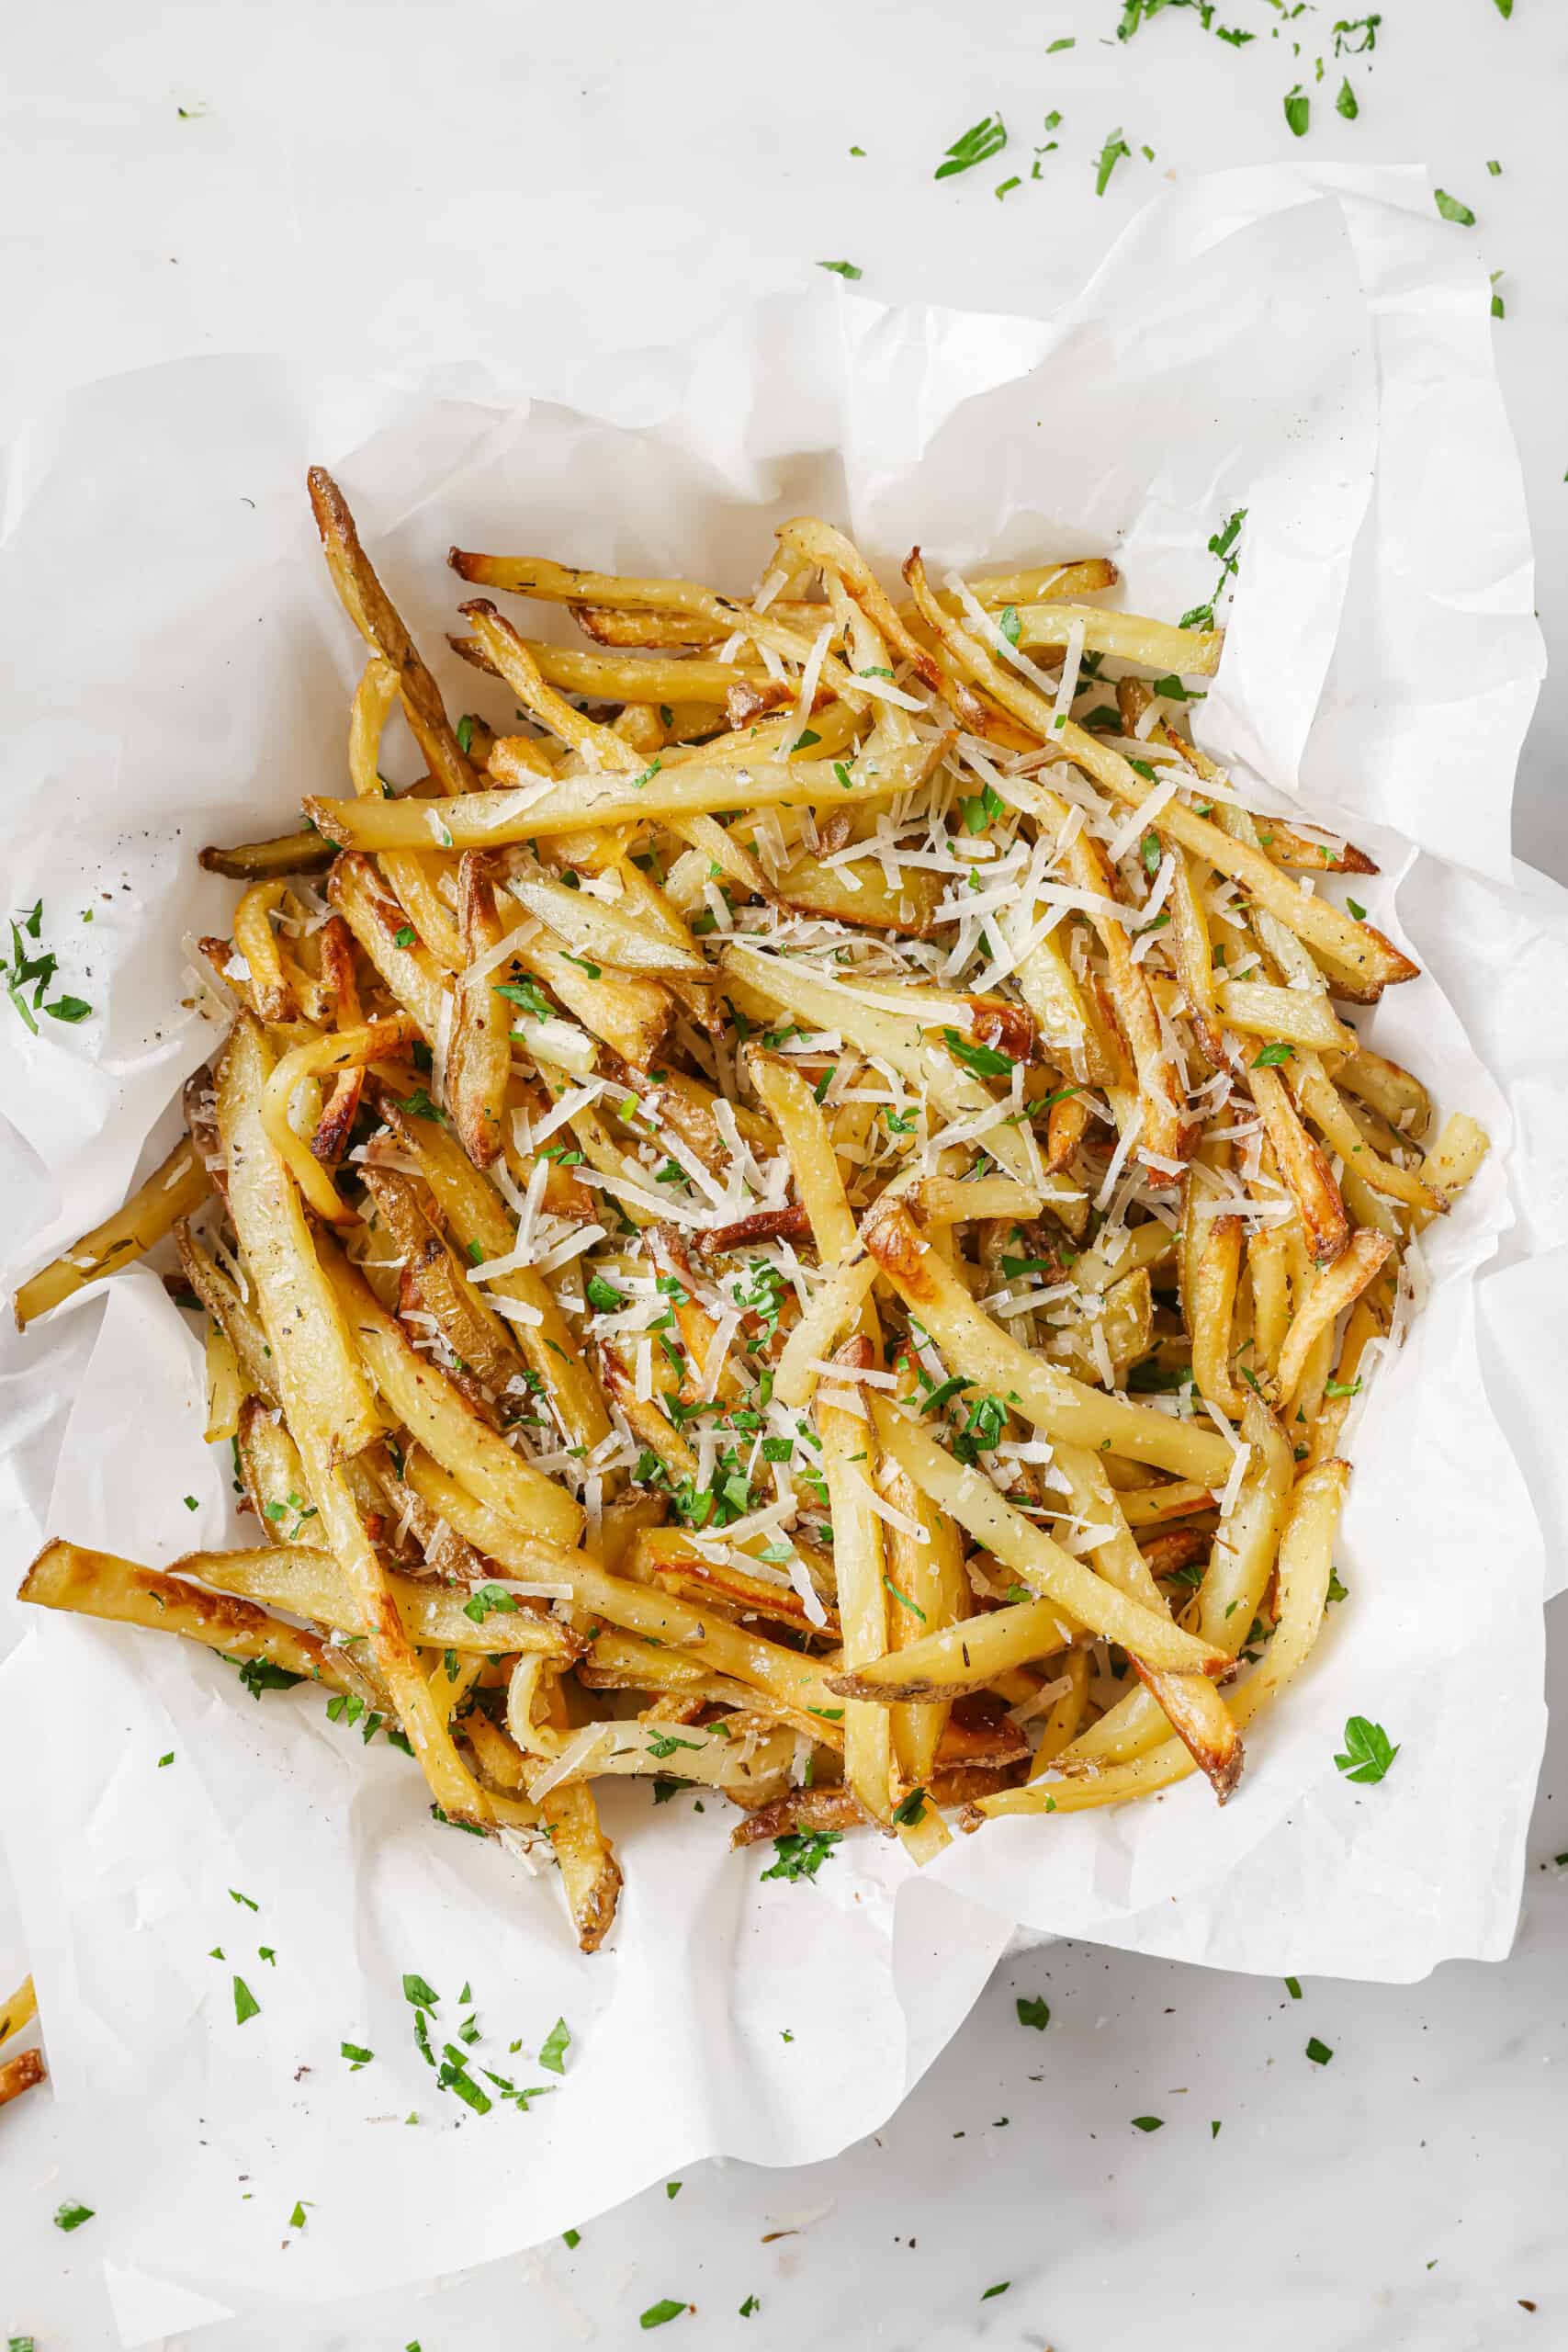 Lots of baked french fries with parmesan on top. 